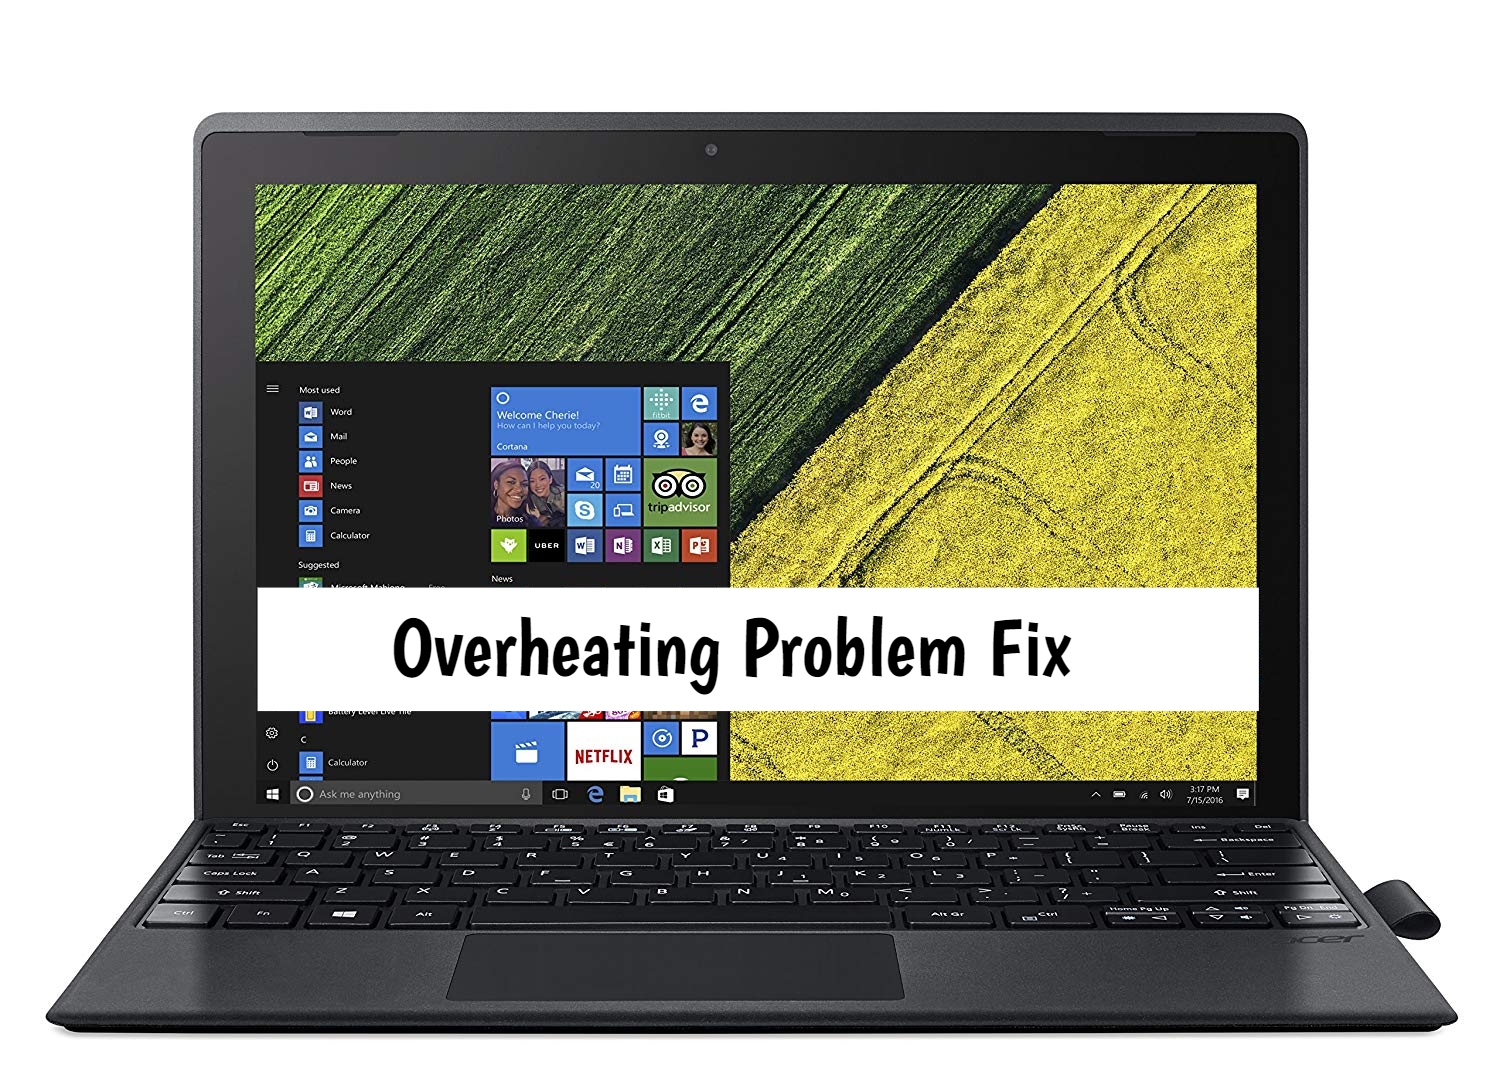 Acer Switch 3 overheating